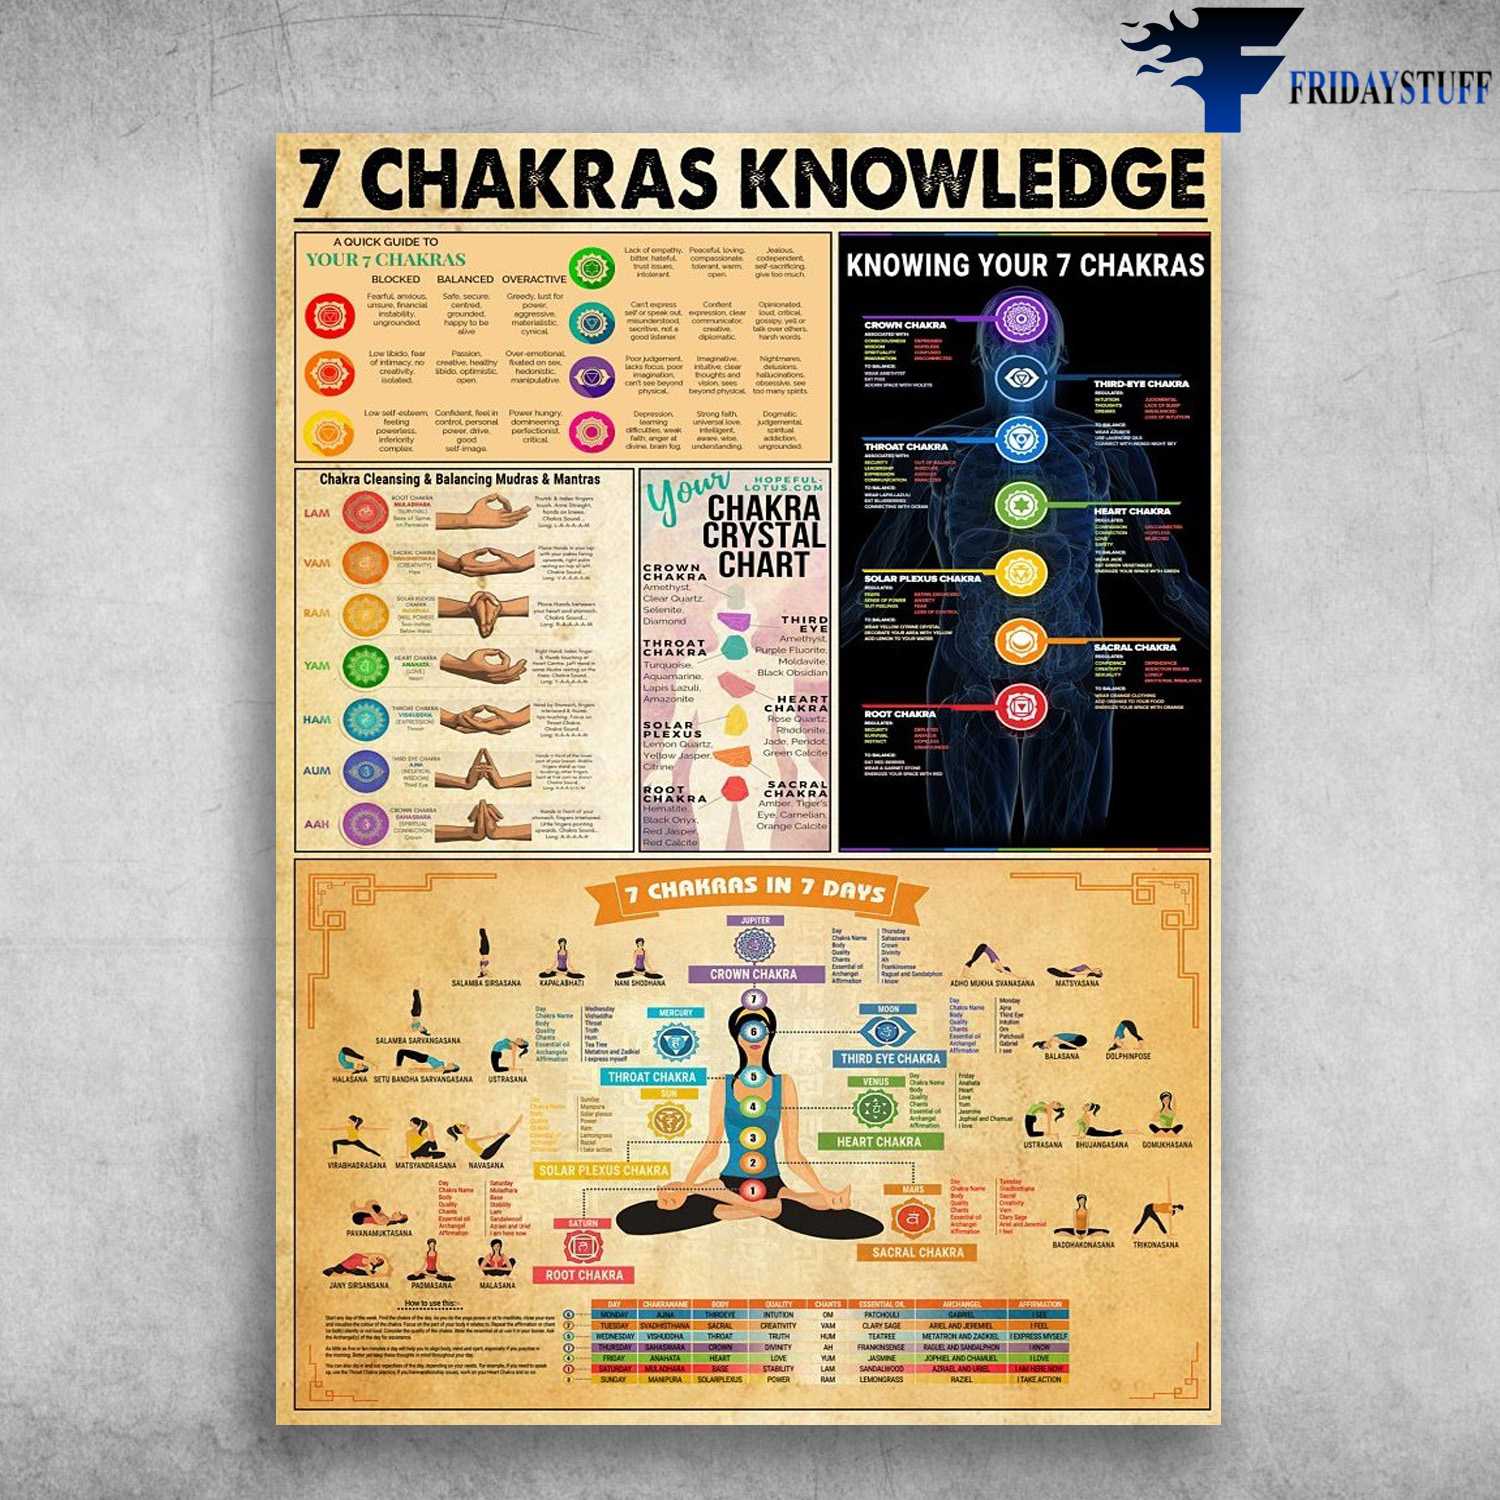 7 Chakras Knowledge, Yoga Poster - Your 7 Chakras, Your Chakra Crystal Chart, Chakra Cleanning, 7 Chacras In 7 Days